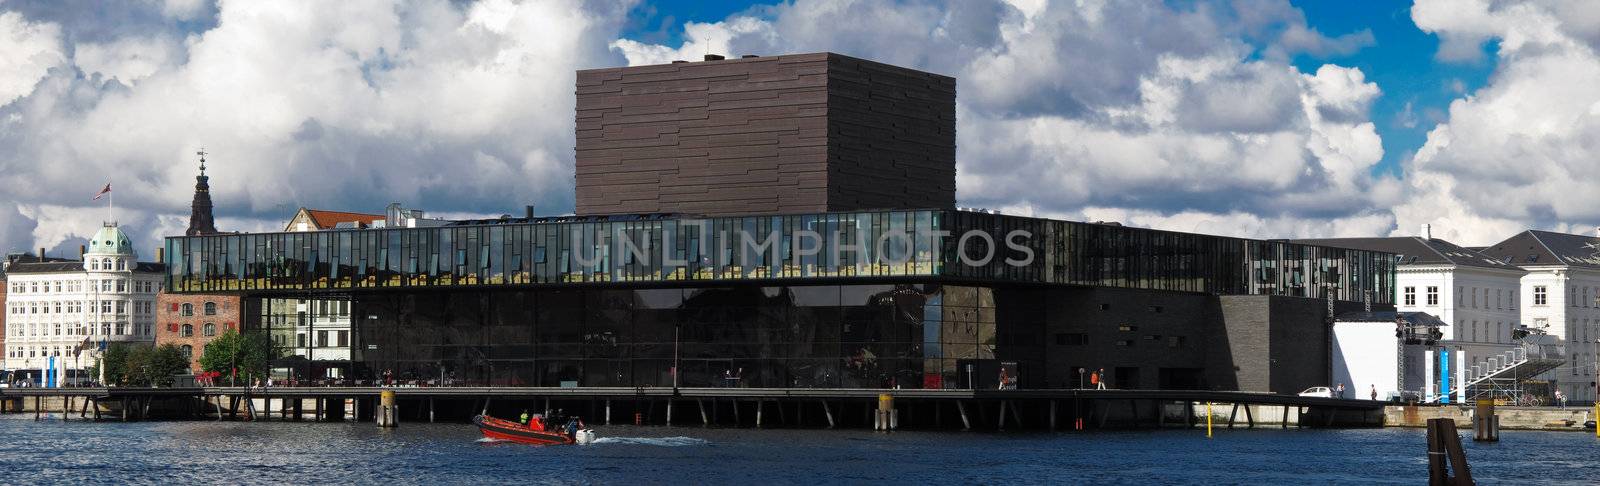 The building of the royal danish theatre on the harbor front of Copenhagen, Denmark